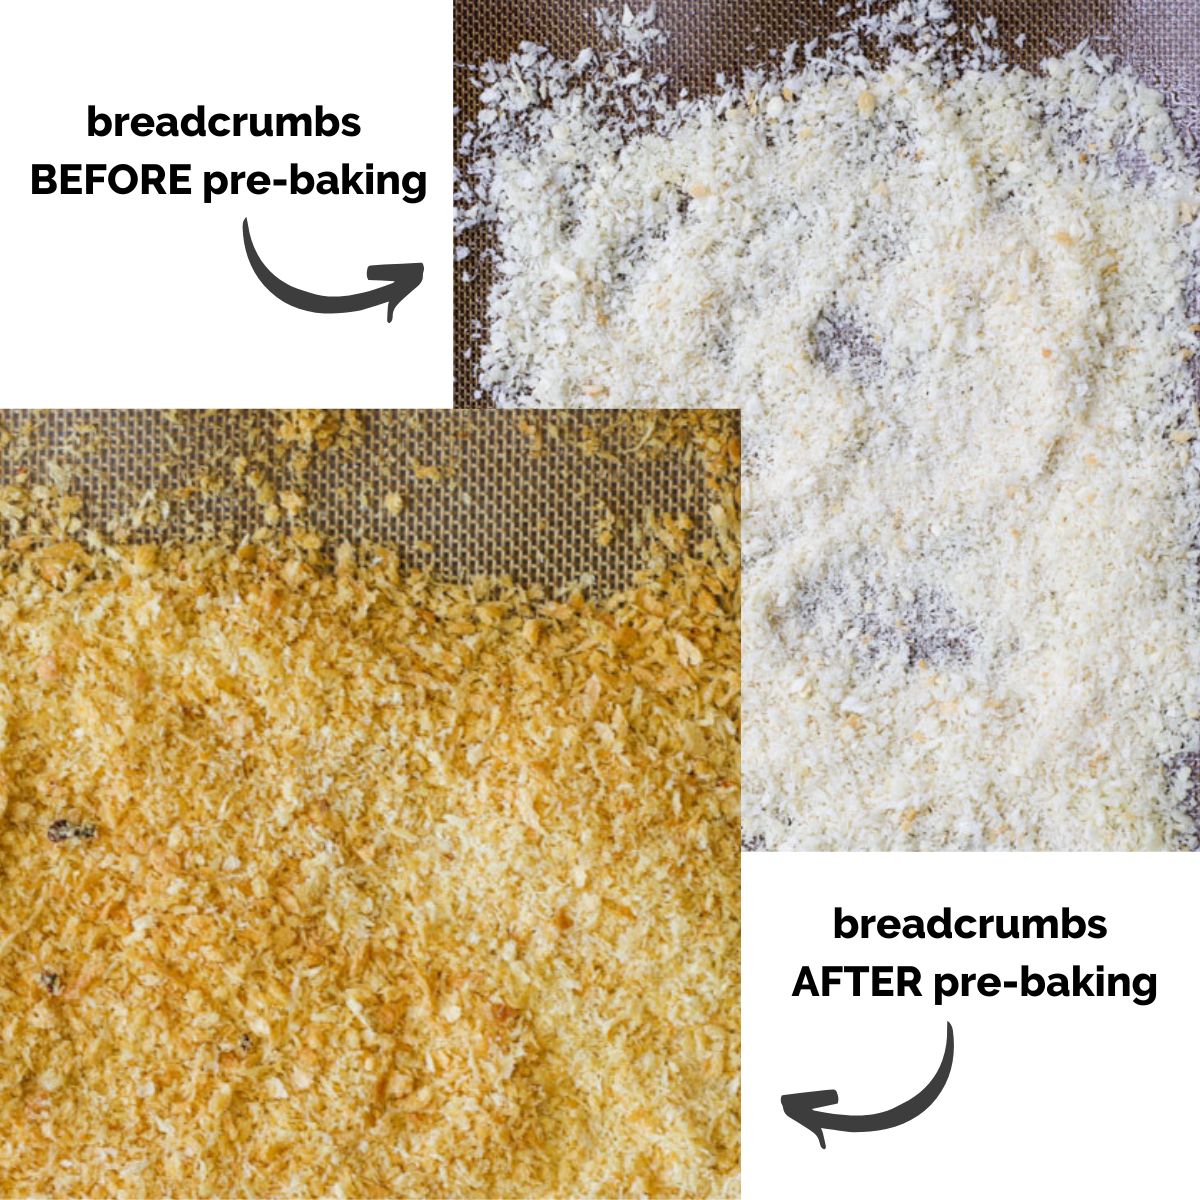 Collage of 2 Images Showing Breadcrumbs on Baking Tray Before and After Baking